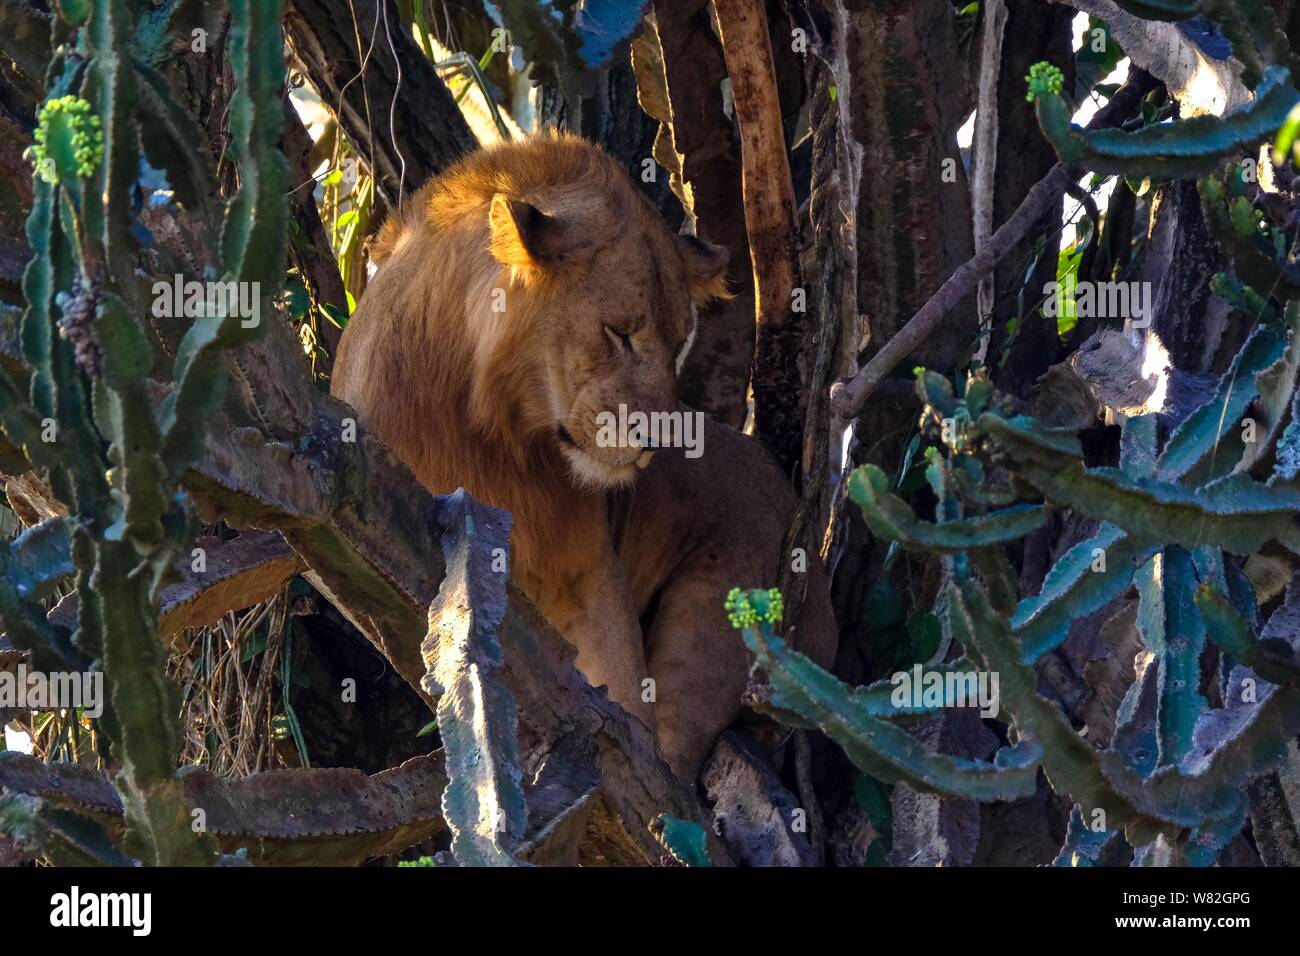 Lion sitting in the middle of trees near cactuses Stock Photo